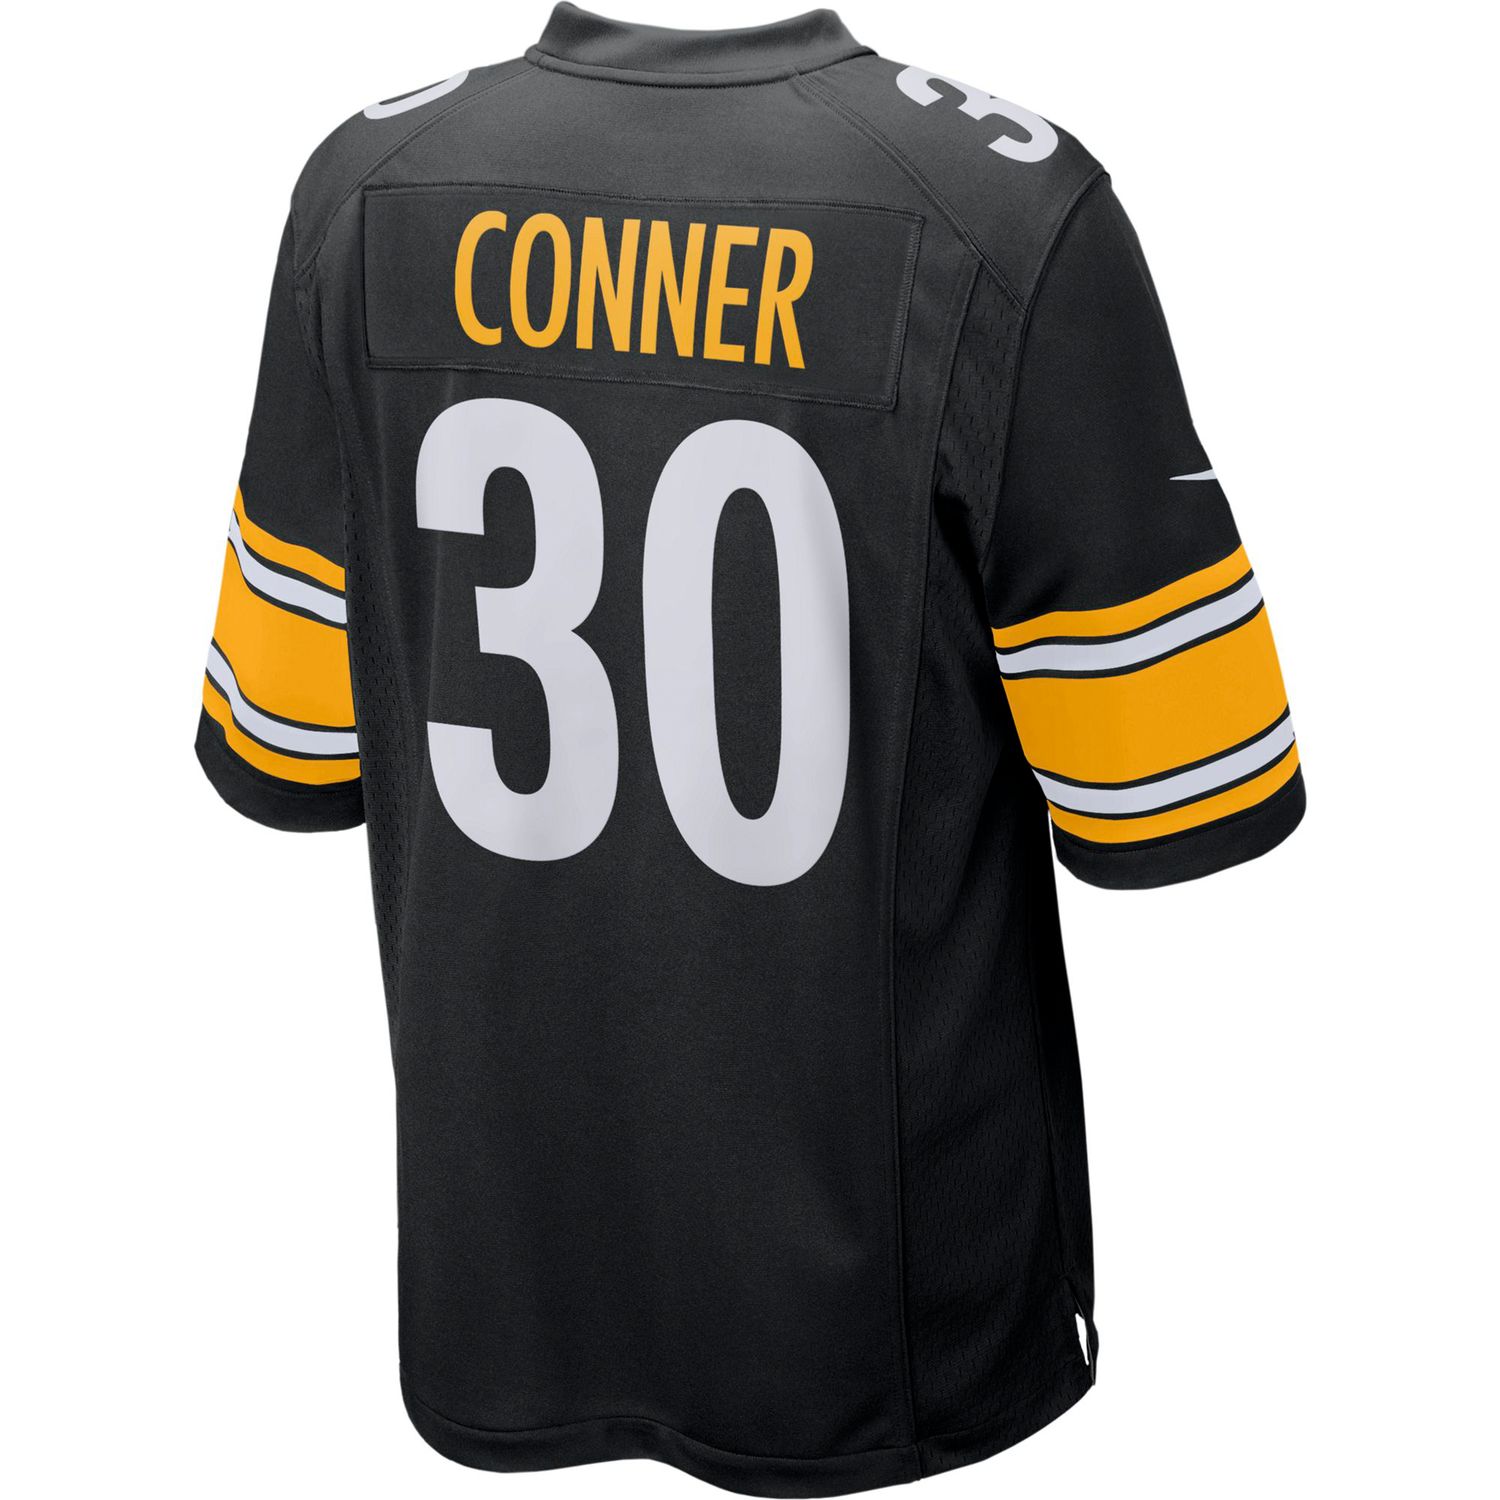 Pittsburgh Steelers James Conner Jersey